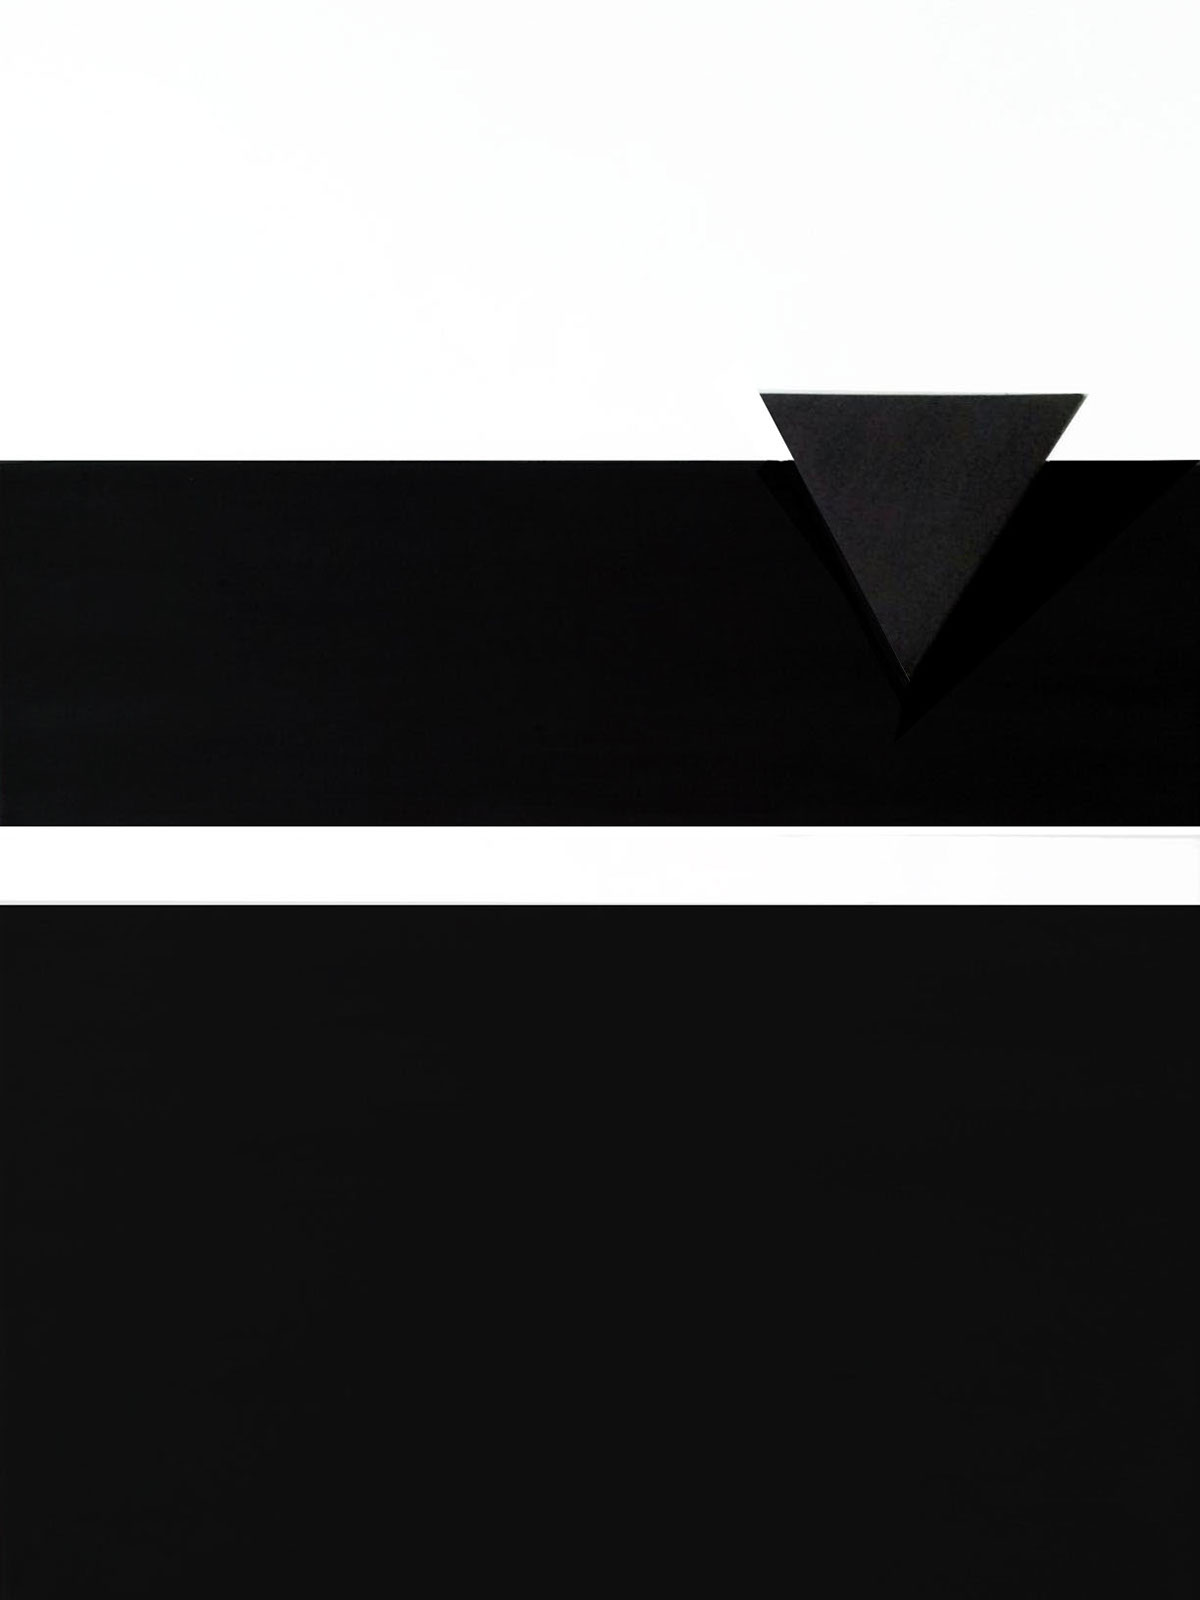 paint art triangle lines equilibrium graphic design acrylic colours black Hipster Minimalism minimal geometry mistery